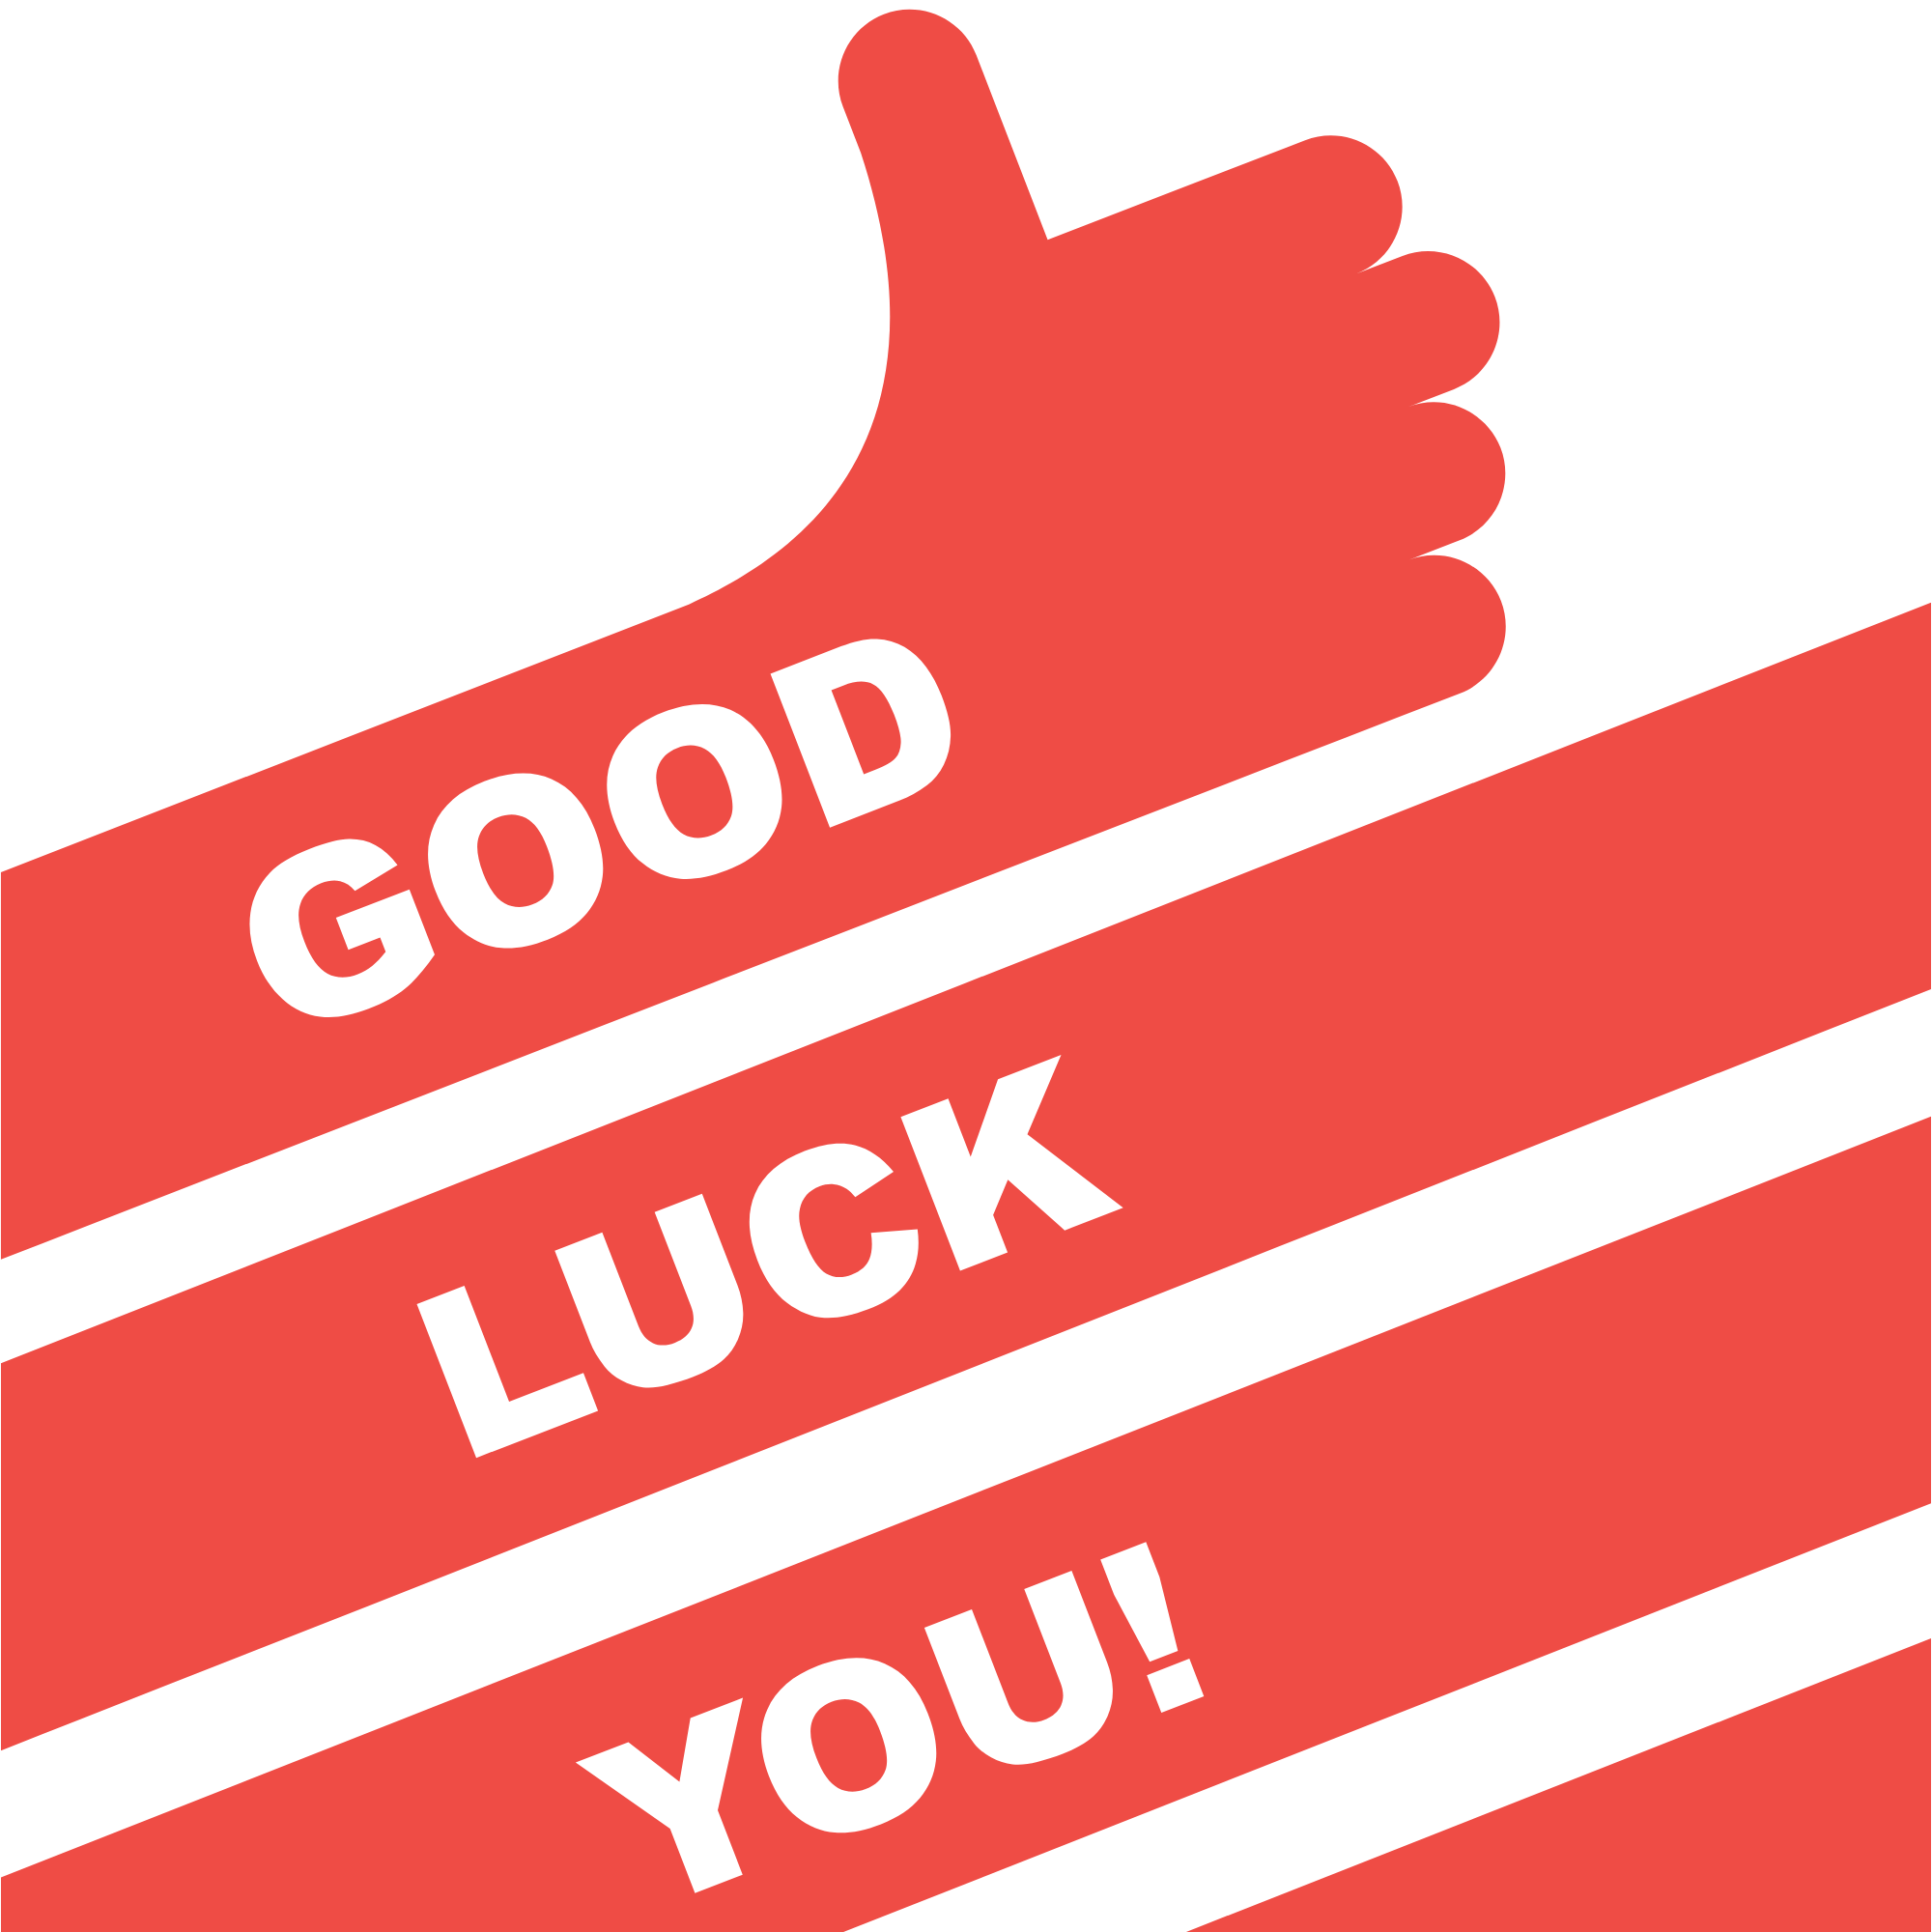 A cartoon red arm is wrapped around the screen with a thumbs up and GOOD LUCK imprinted.